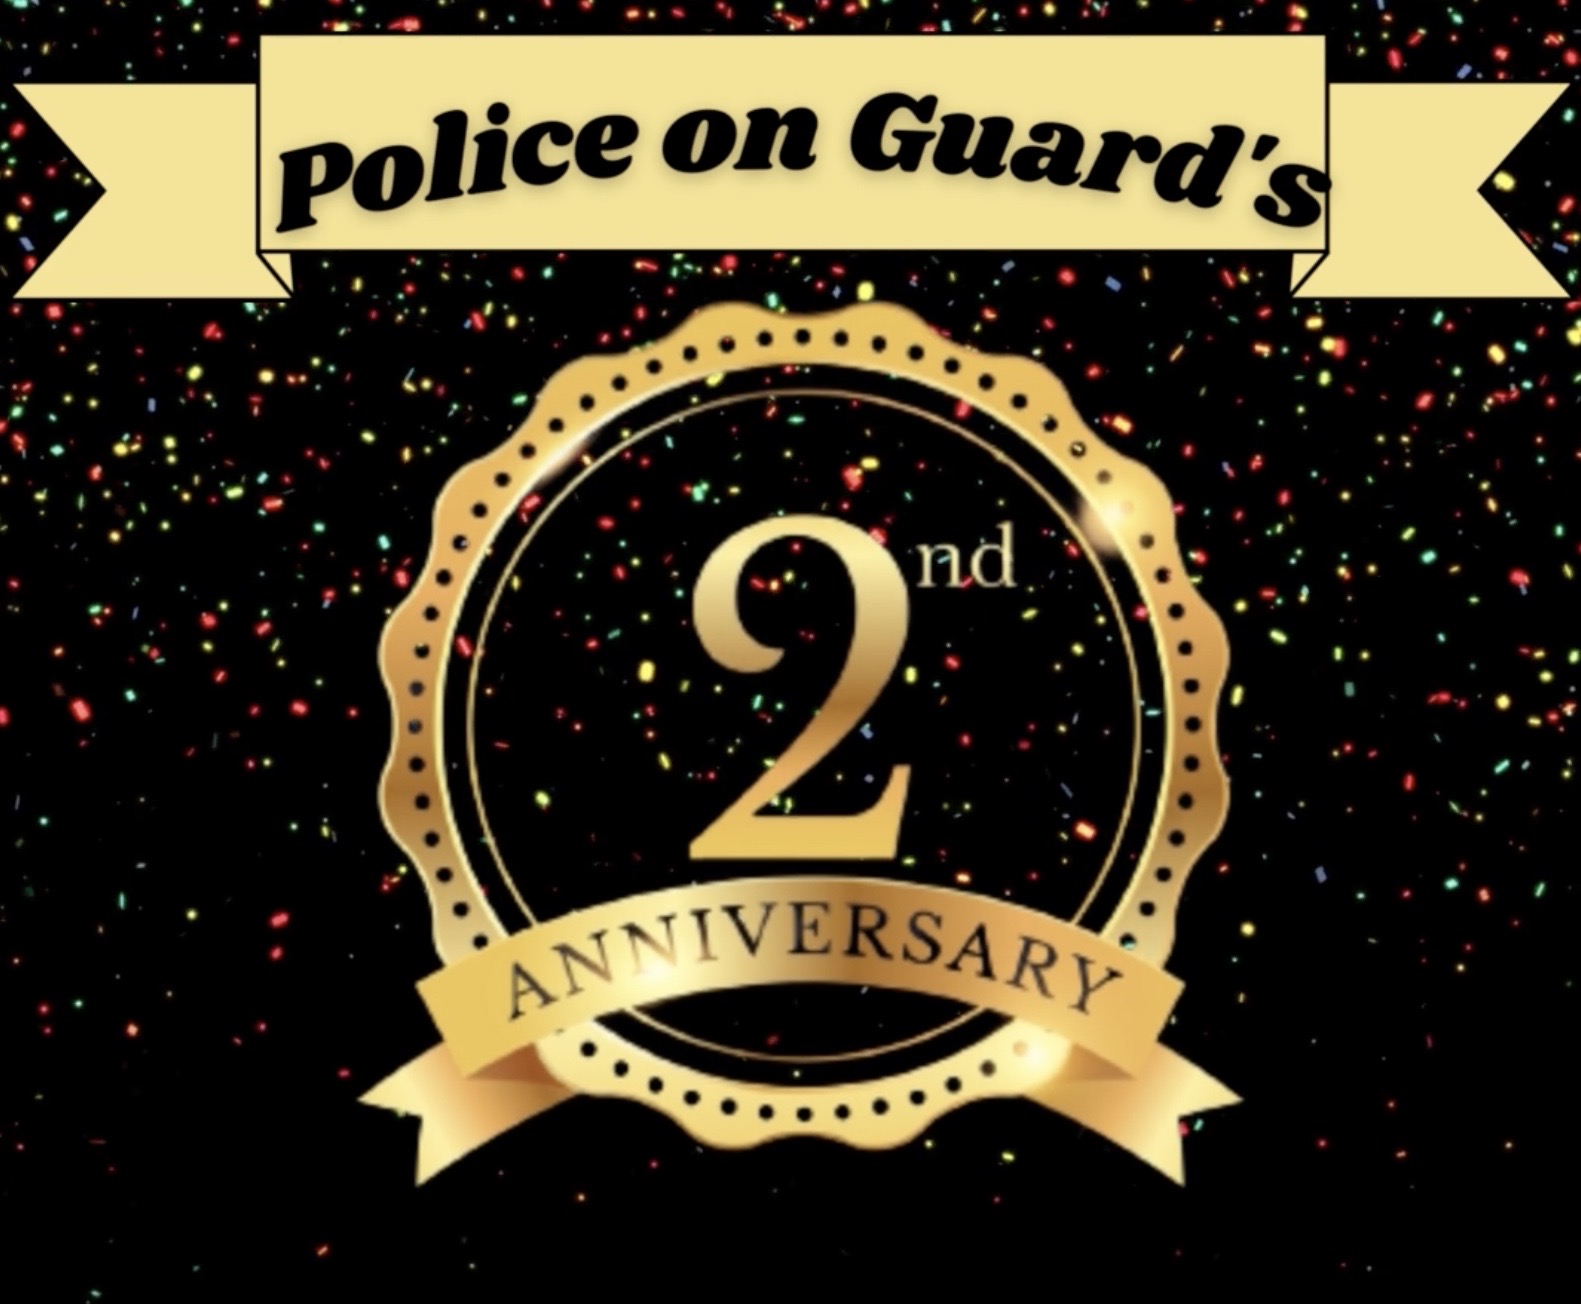 Police on Guard’s 2nd Year Anniversary